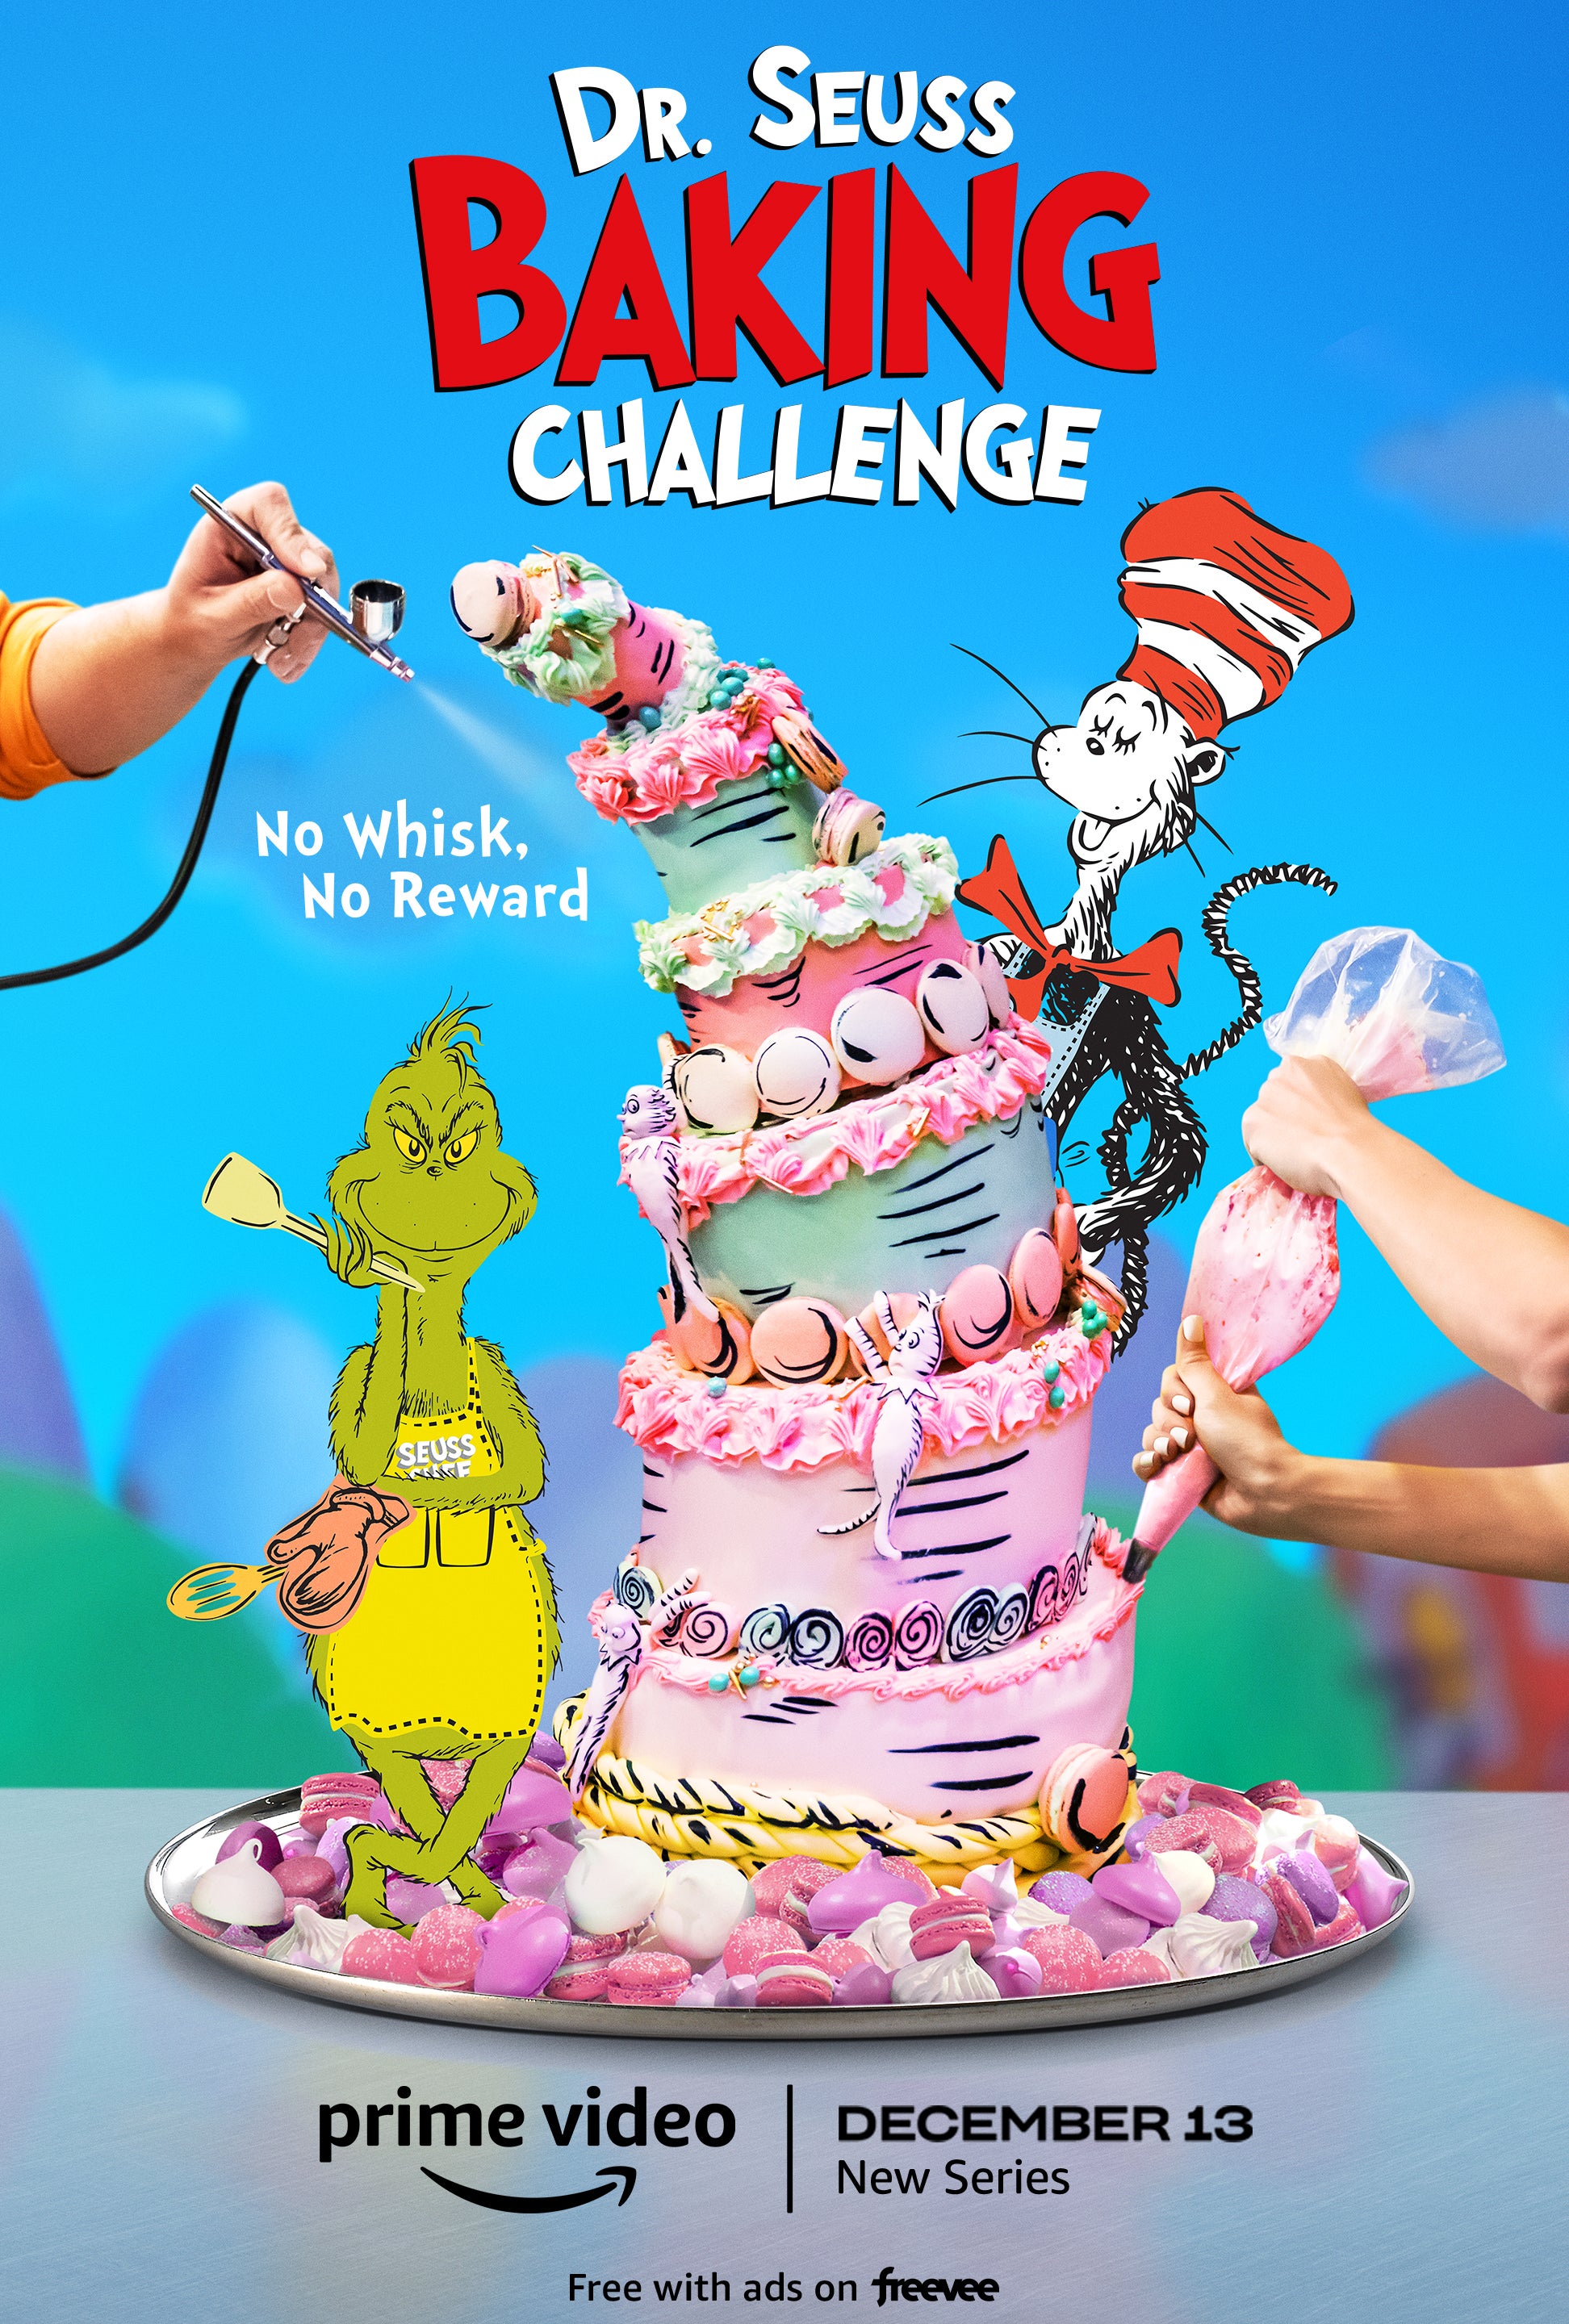 TV ratings for Dr. Seuss Baking Challenge in the United Kingdom. Amazon Prime Video TV series